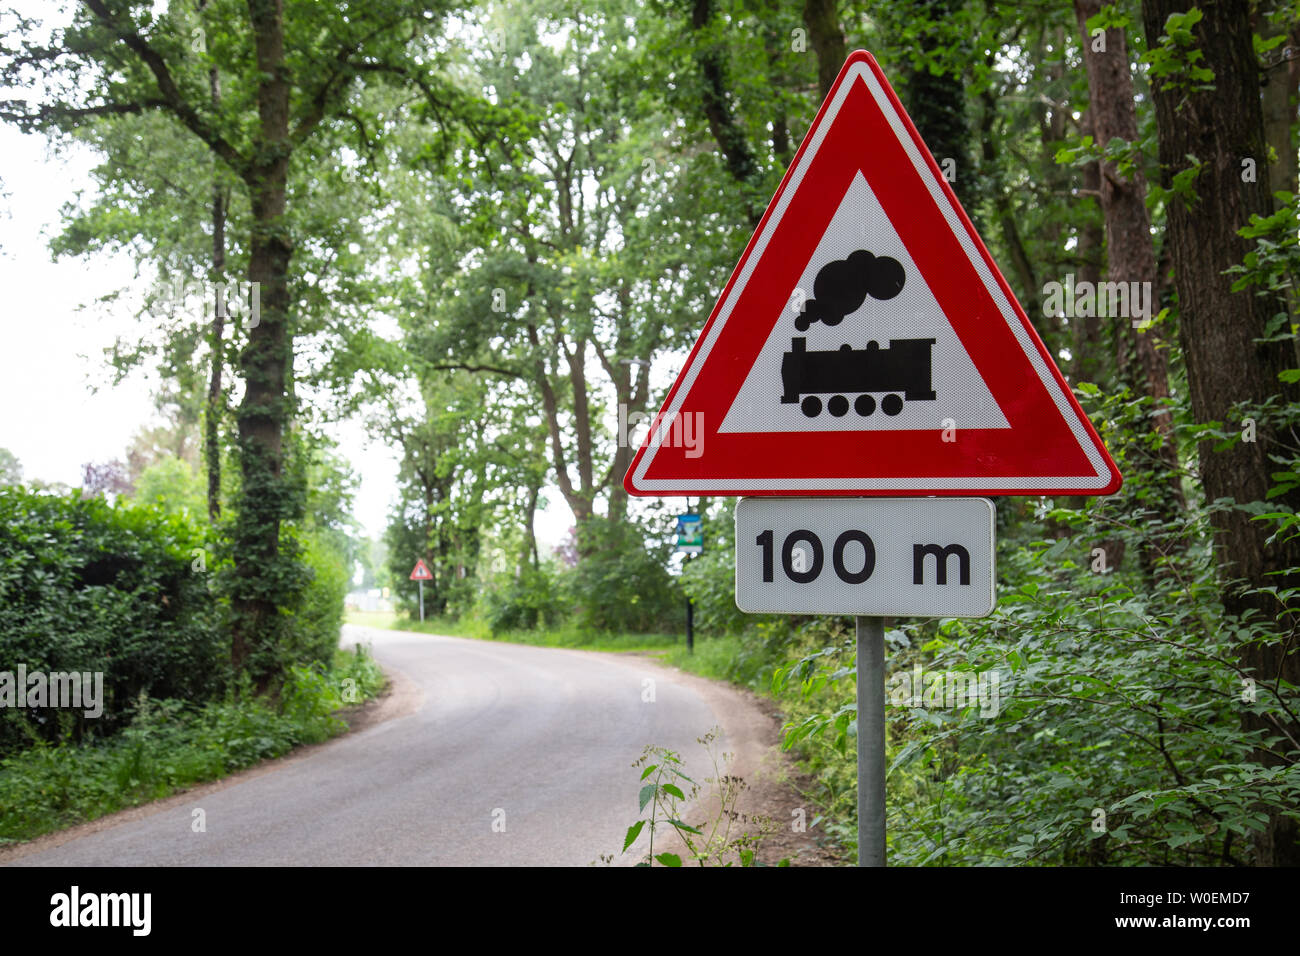 Dutch Warning Road Sign With Train Meaning Level Crossing Without Barrier Or Gates Ahead Stock Photo Alamy